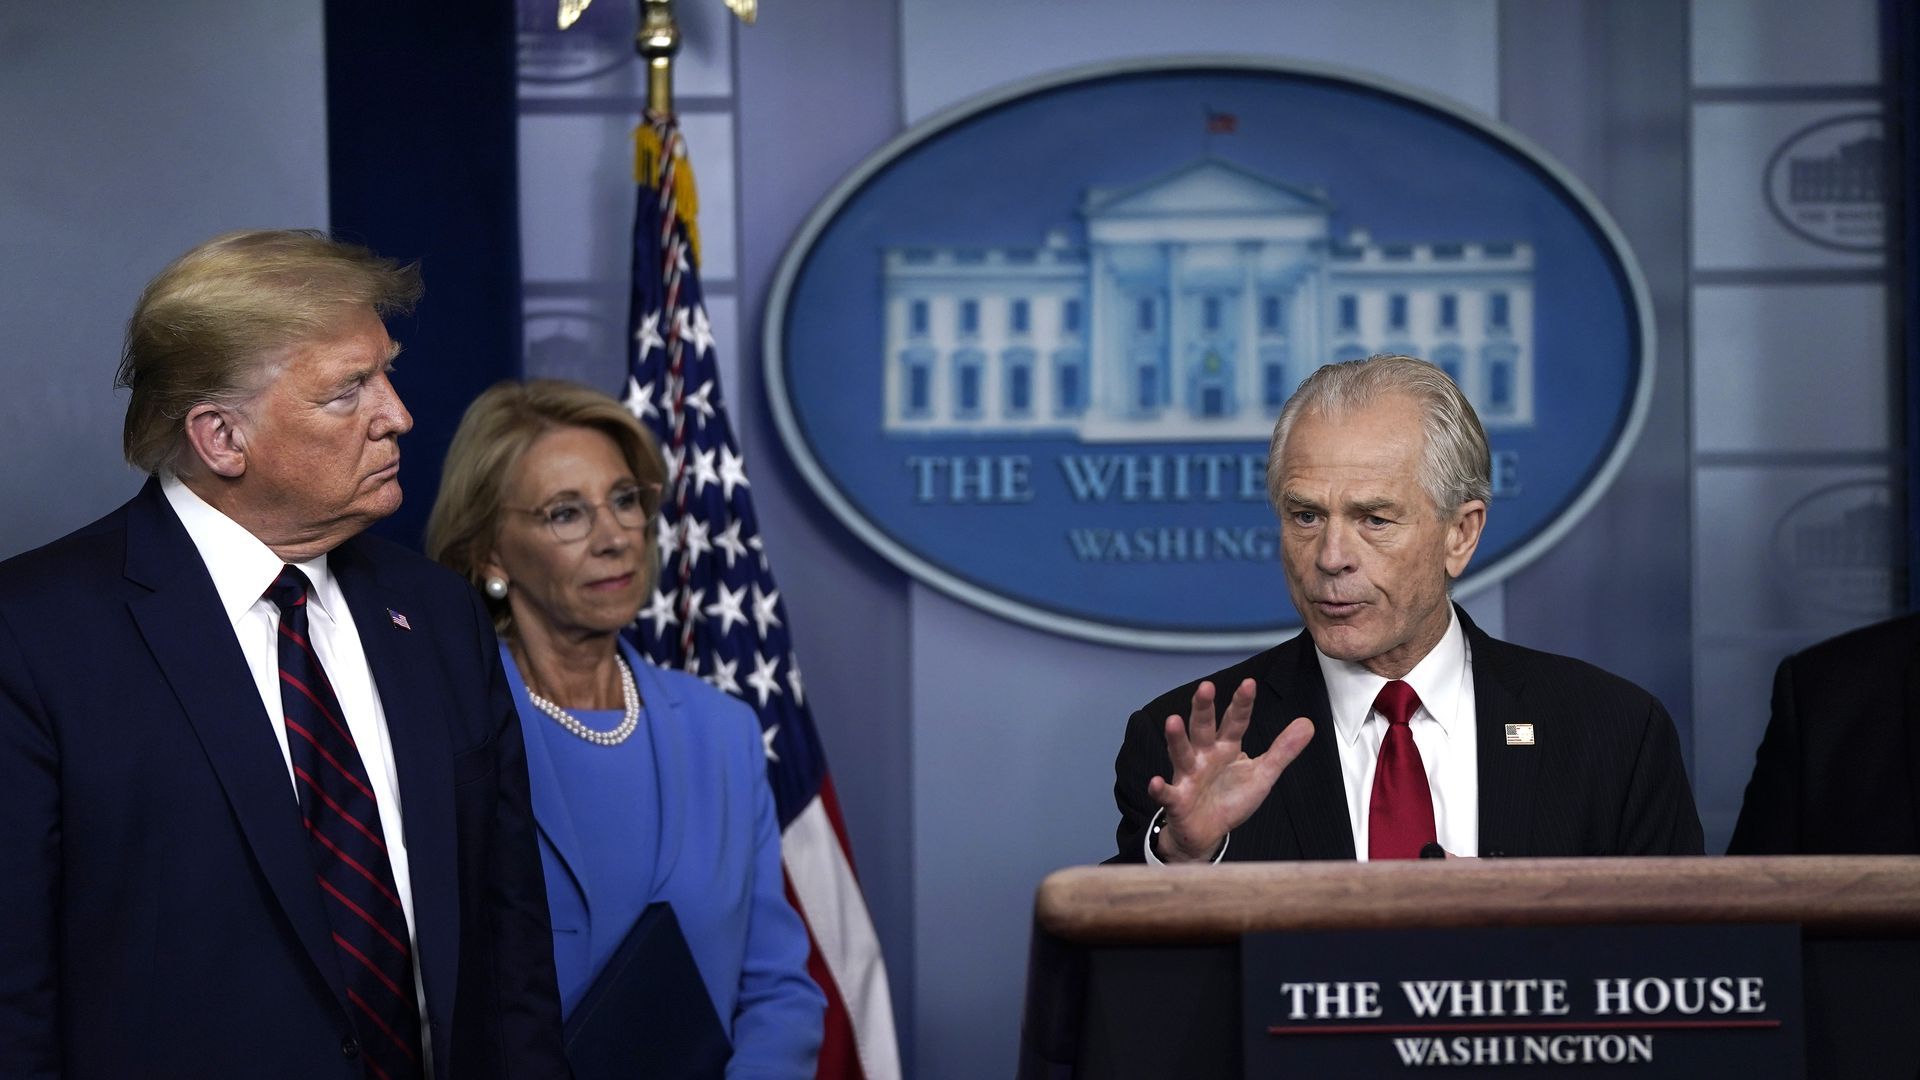 Peter Navarro speaks at the White House press room as President Trump and Sec. of Education Betsy DeVos stand to the side